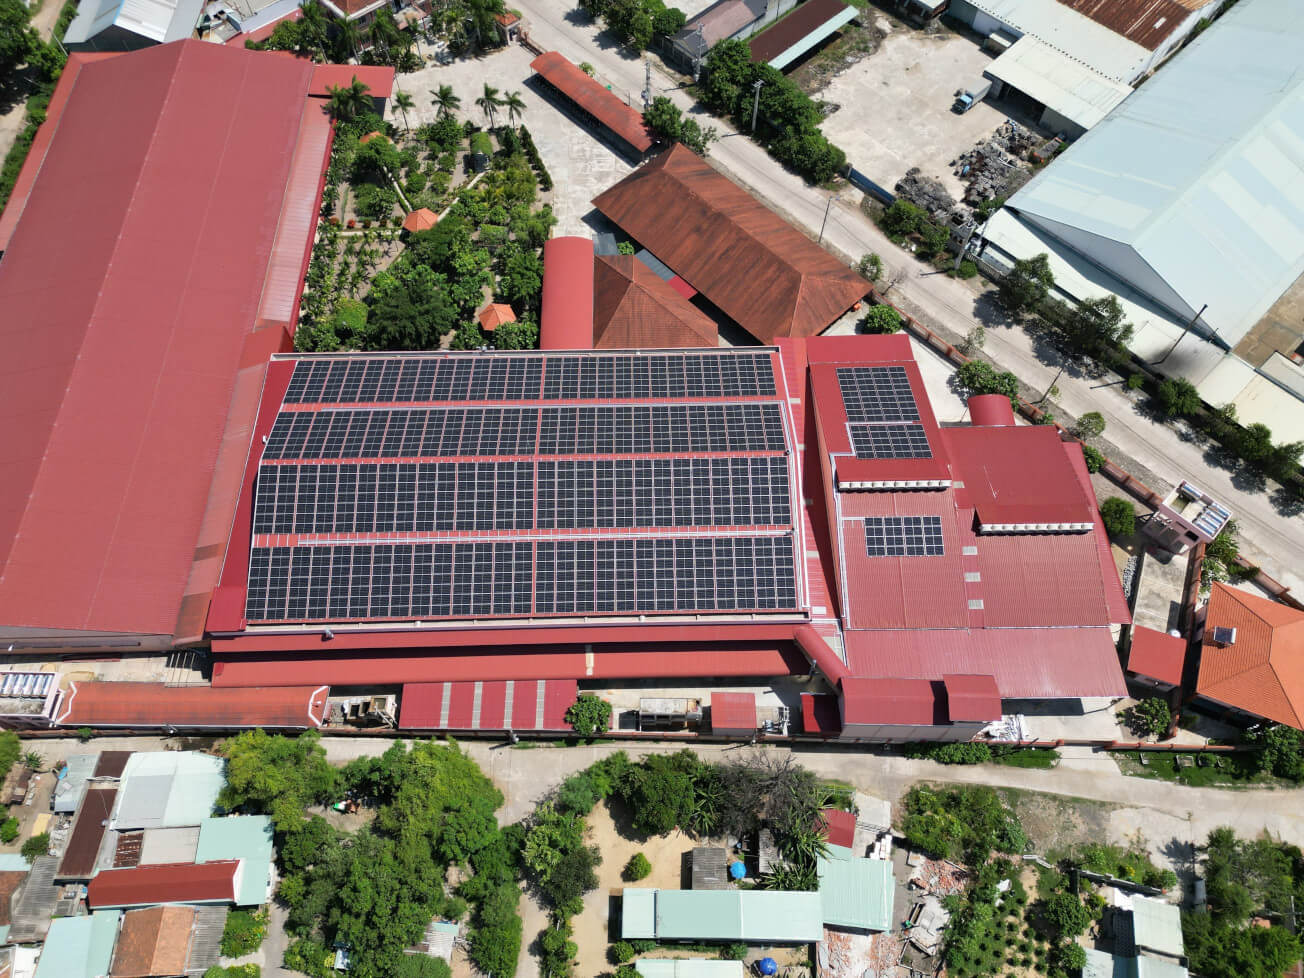 Tatonka commissions 550 kWp photovoltaic system in Vietnam